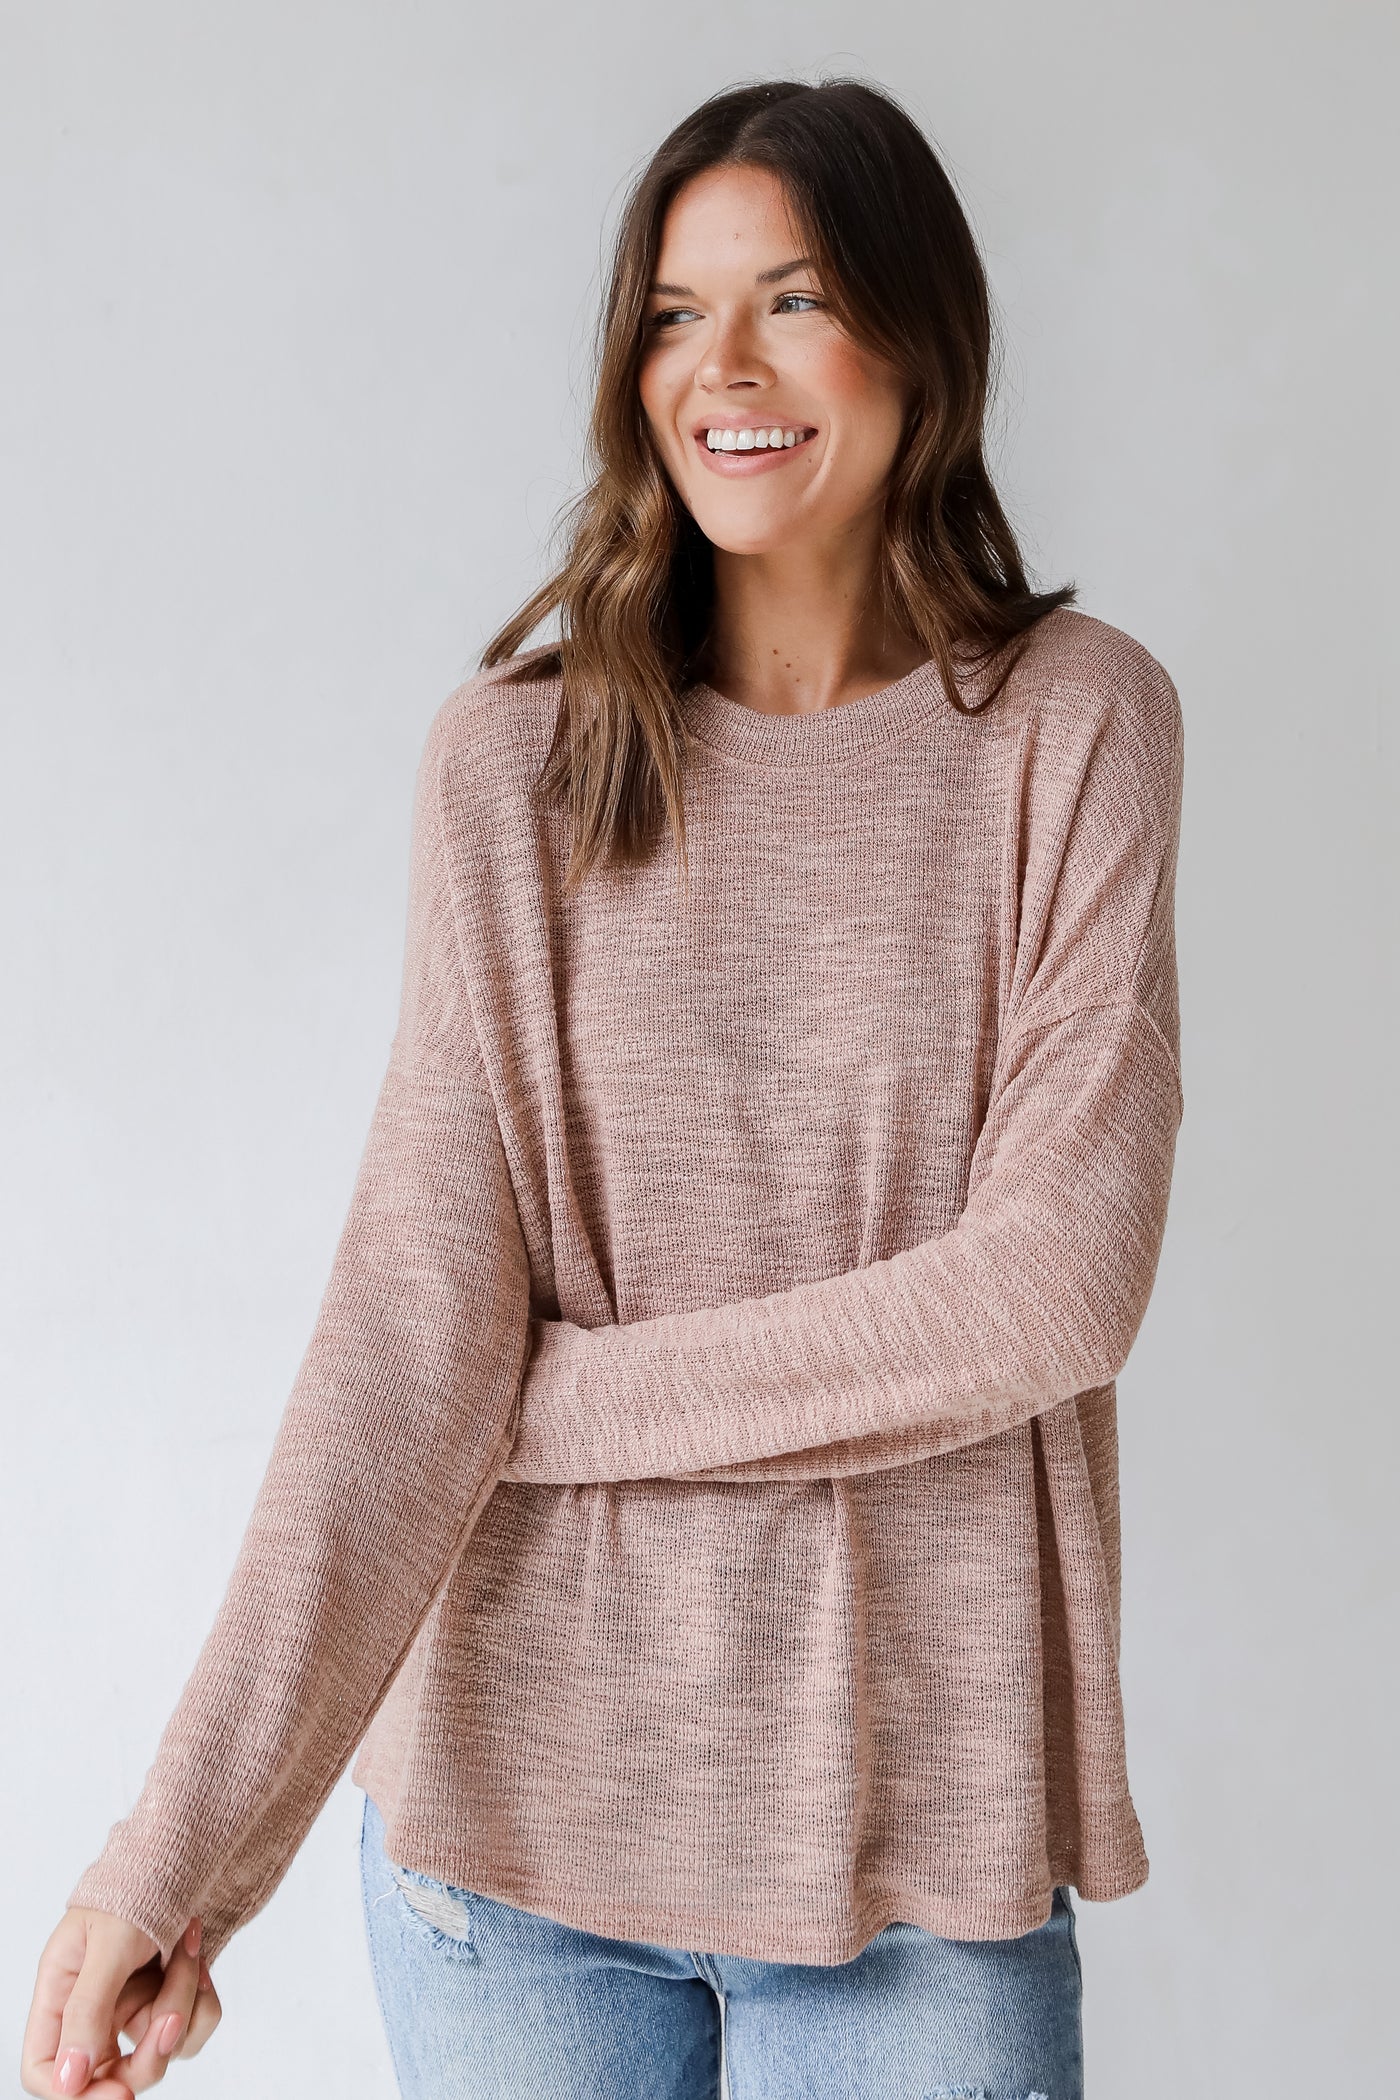 Knit Top in blush front view